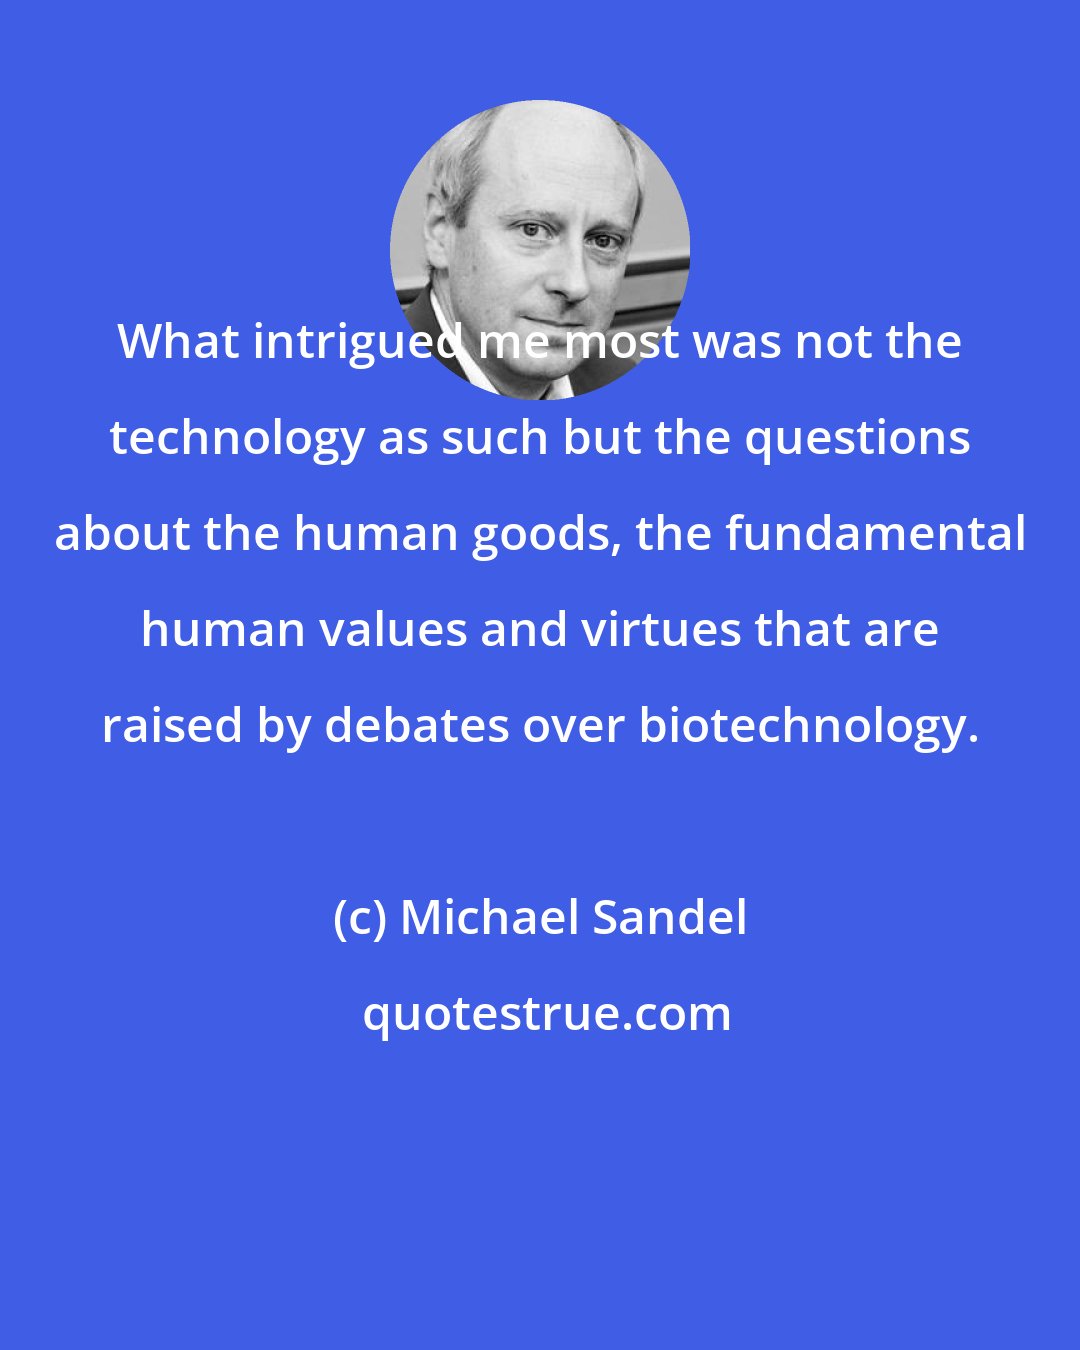 Michael Sandel: What intrigued me most was not the technology as such but the questions about the human goods, the fundamental human values and virtues that are raised by debates over biotechnology.